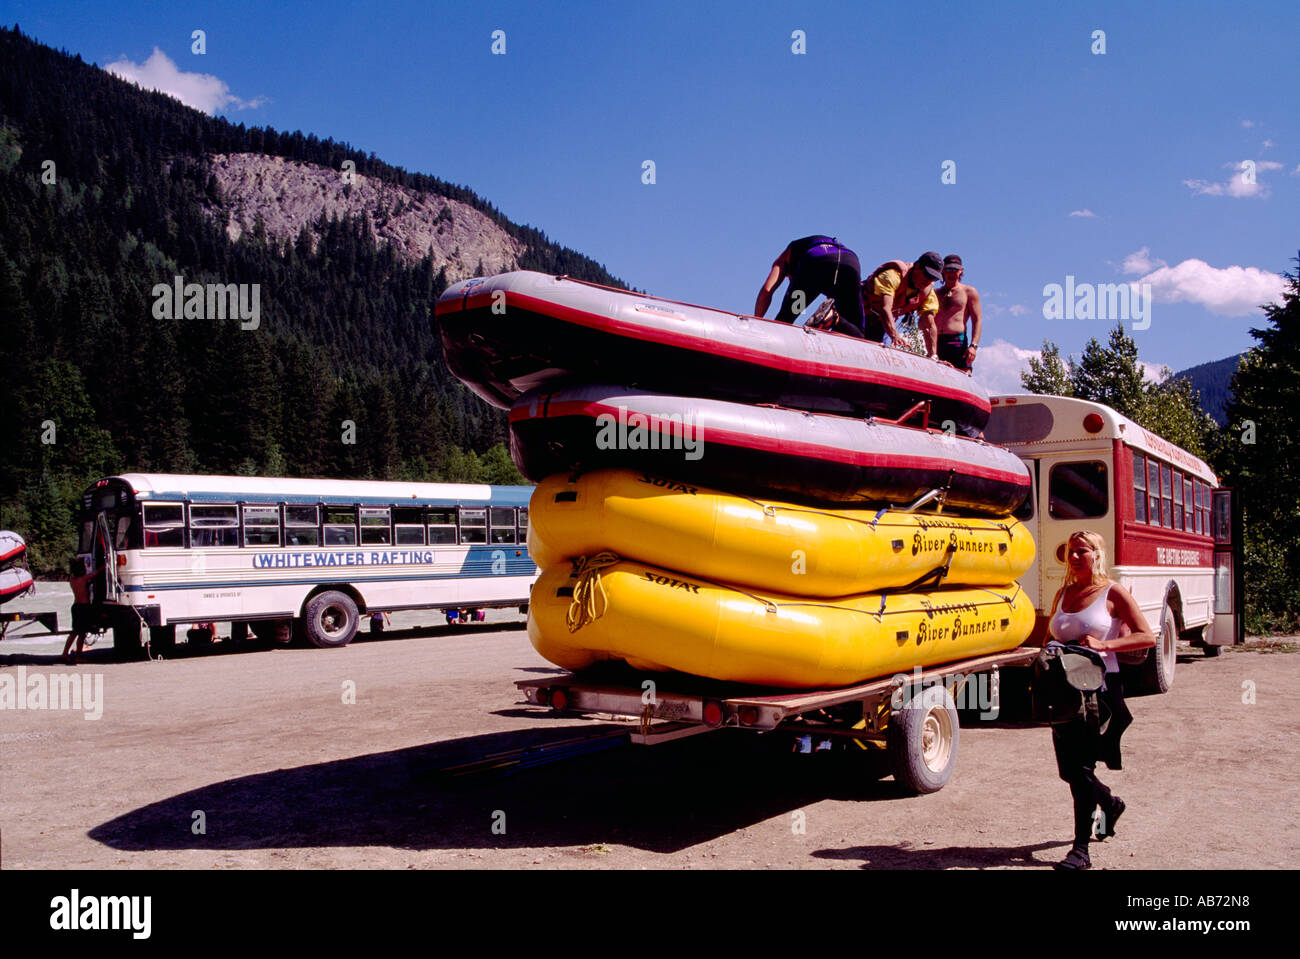 Preparing Rafts for White Water Rafting on the Kicking Horse River near Golden in the Canadian Rockies British Columbia Canada Stock Photo